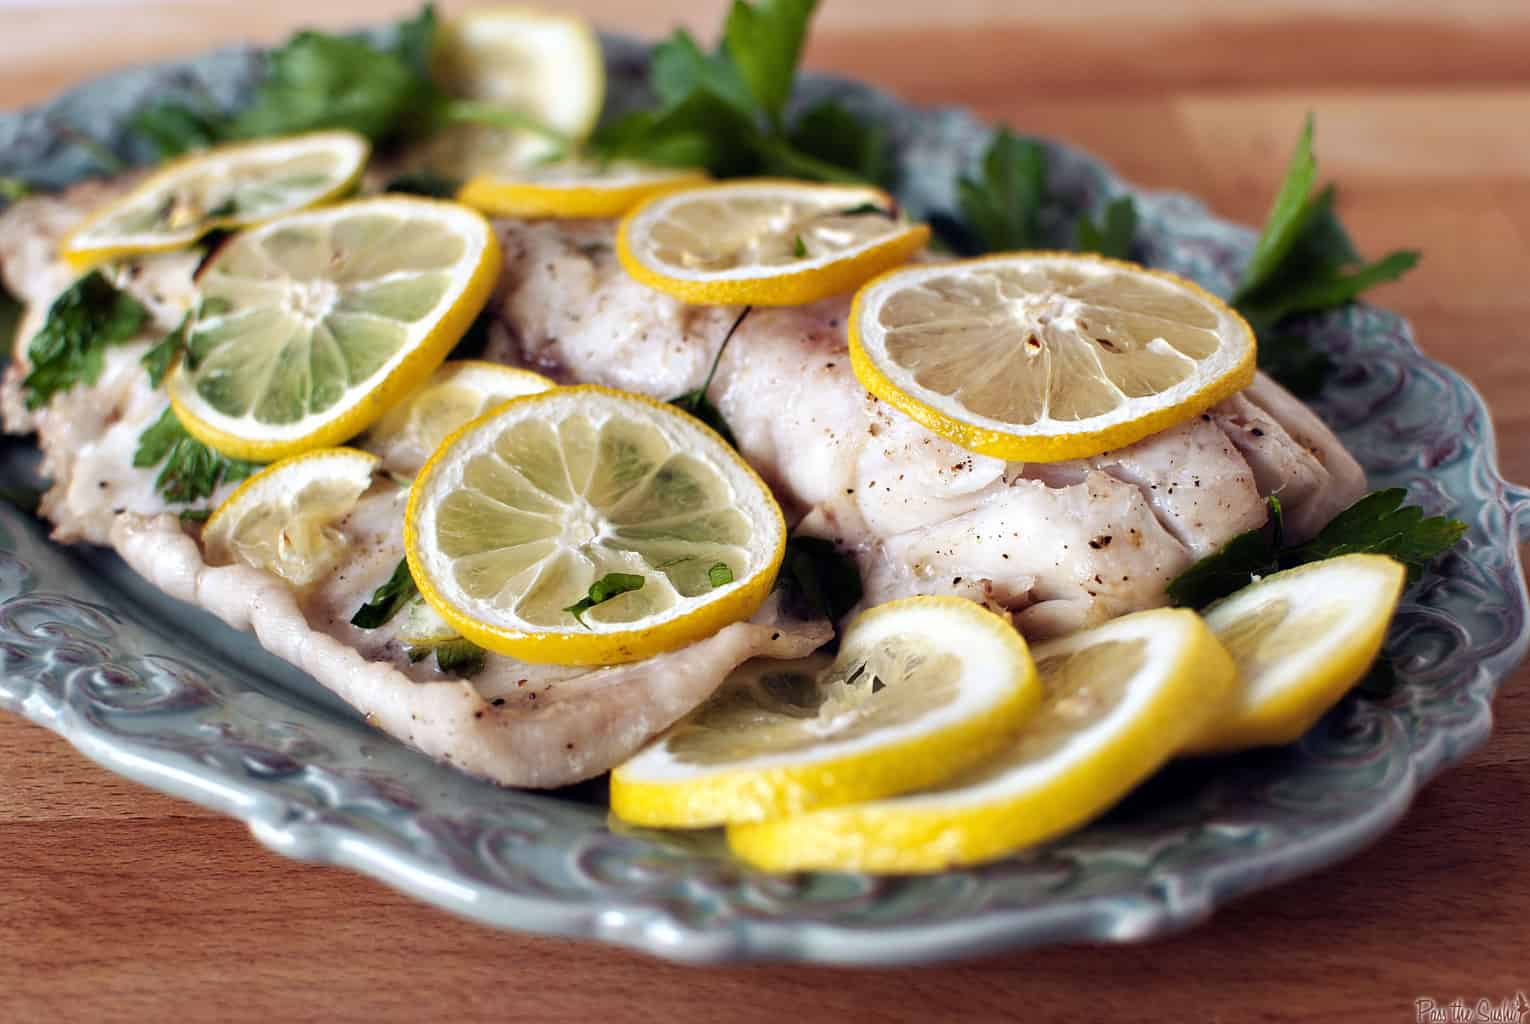 Baked fish is a healthy choice for lunch or dinner. Lemon and fresh parsley give this baked fish dinner a huge burst of flavor. \\ PassTheSushi.com